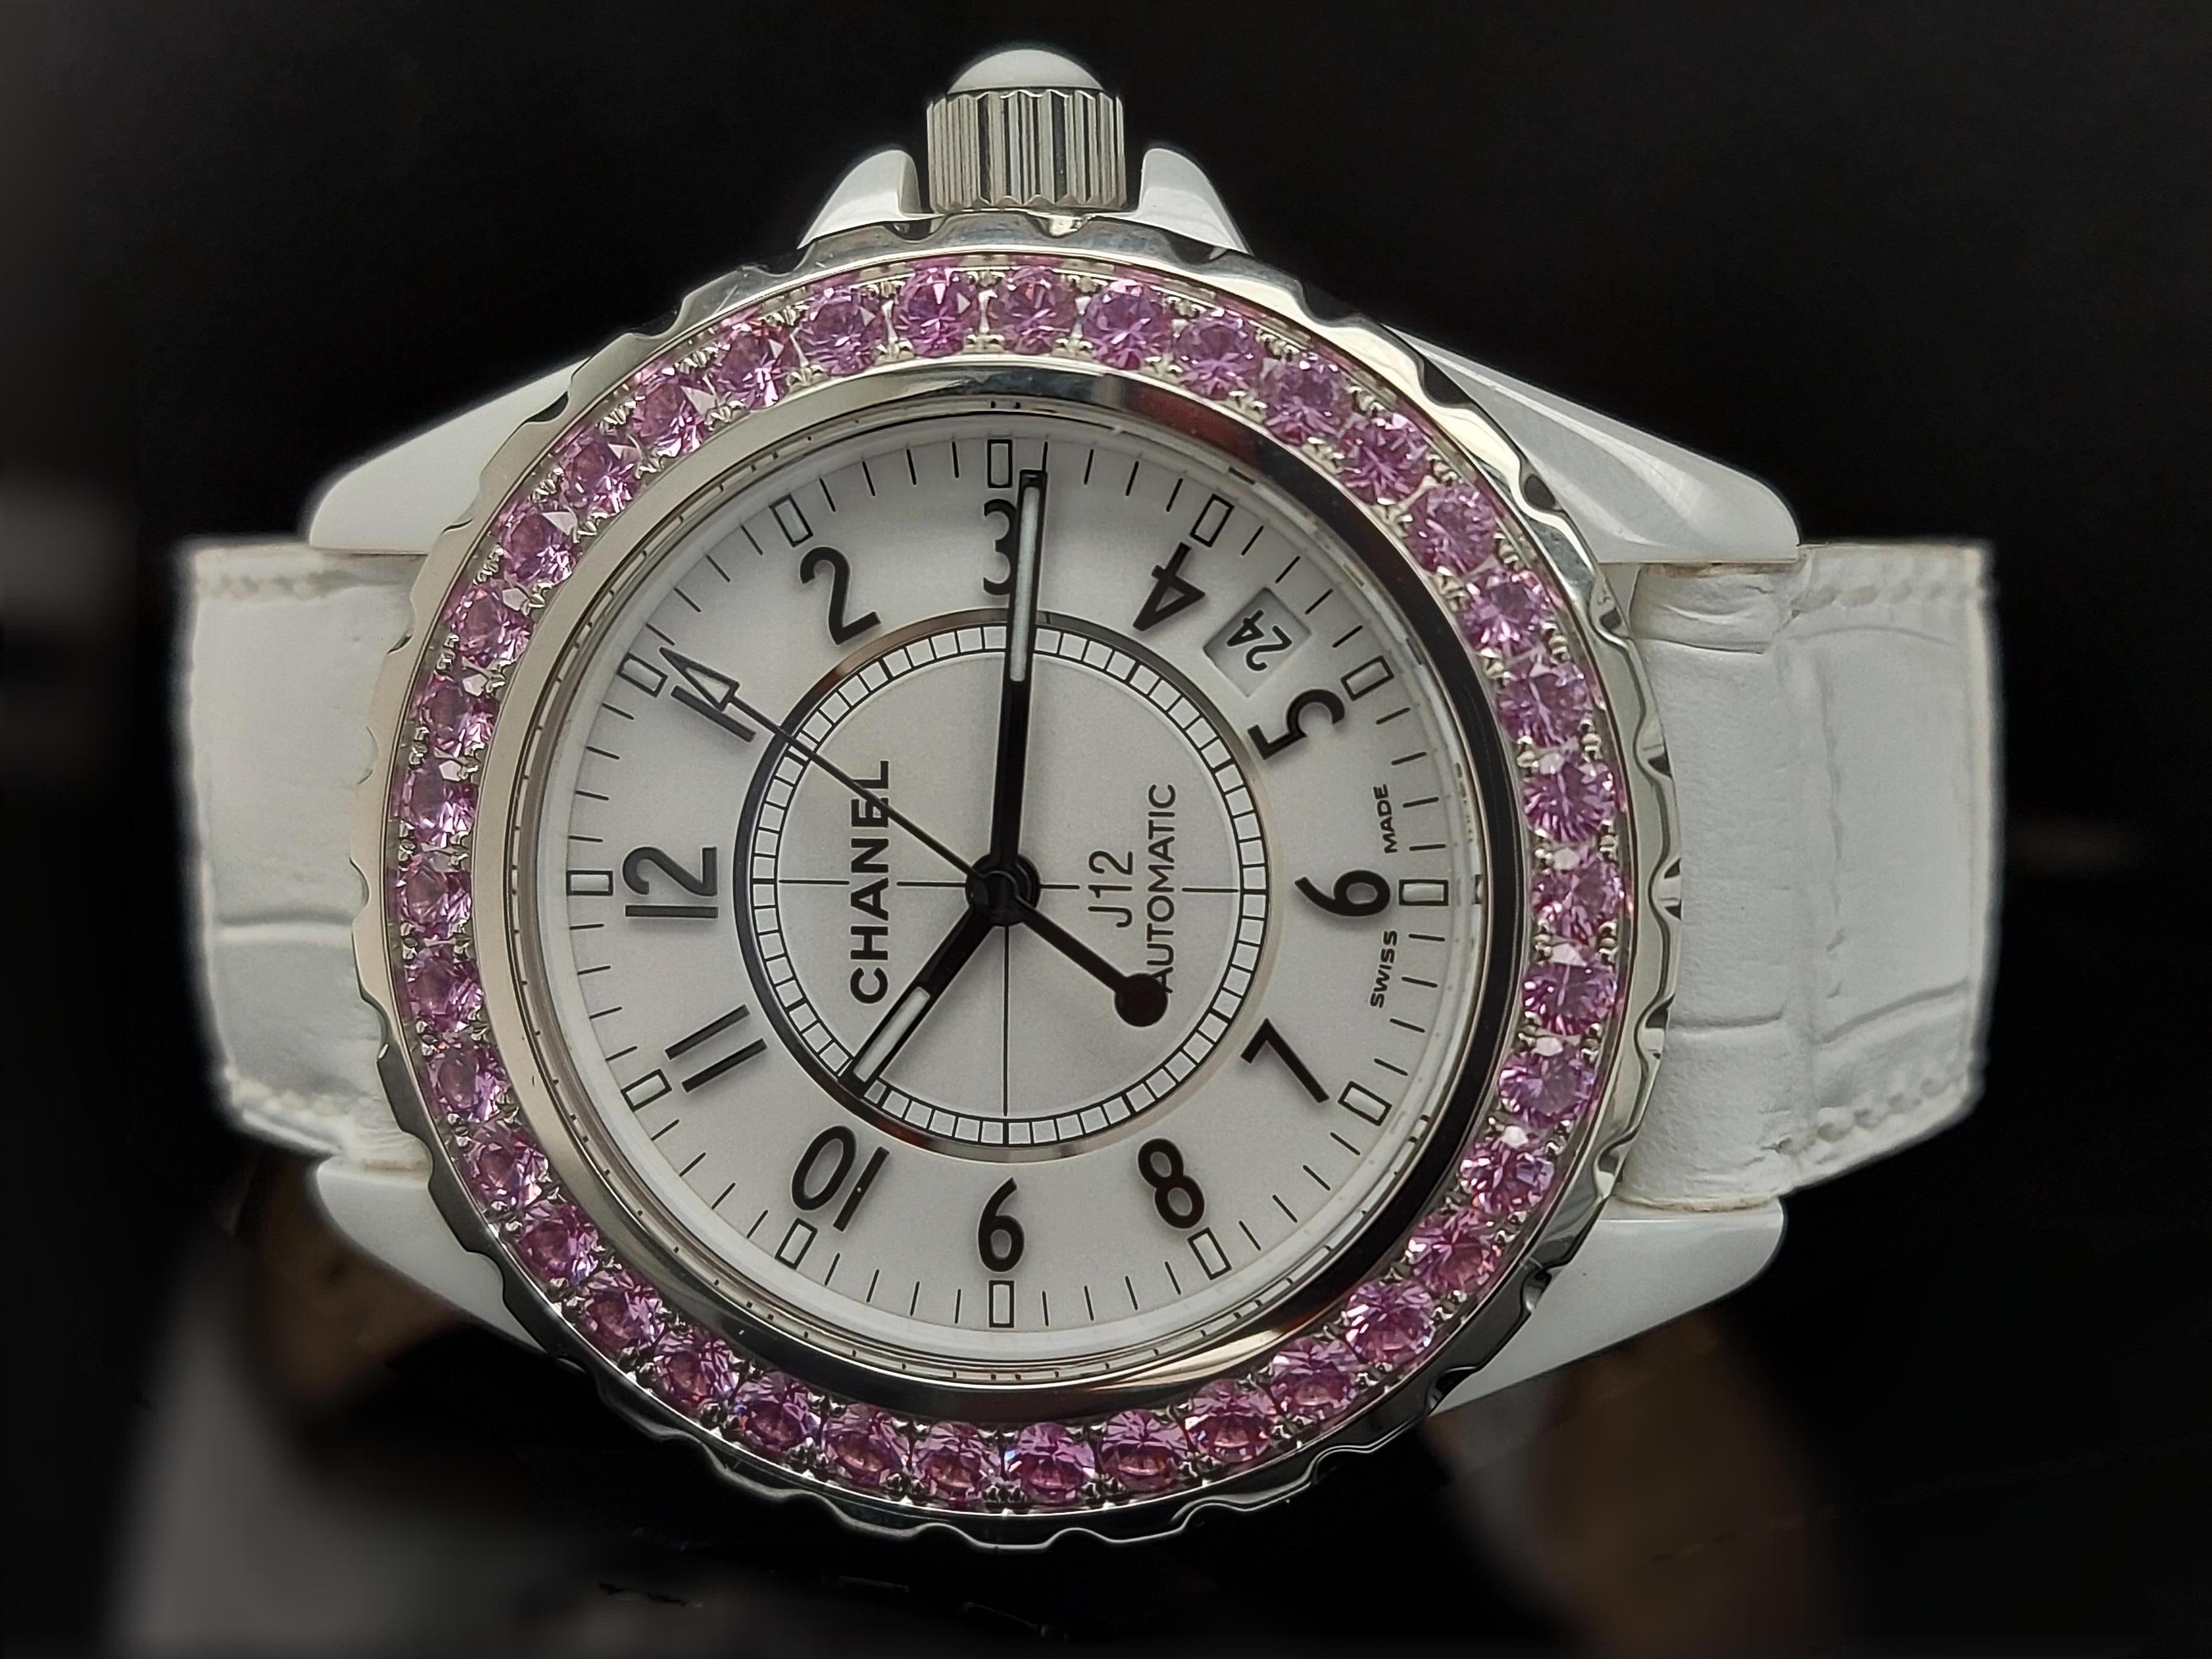 Chanel J12, Automatic, Ceramic 38 mm case, With pink sapphires

Reference: H1182

Model: Chanel J12

Movement: Automatic

Functions: Hours, Minutes, Seconds, Date window between 4 and 5 o'clock

Case: Ceramic, Steel bezel, diameter 38 mm, thickness